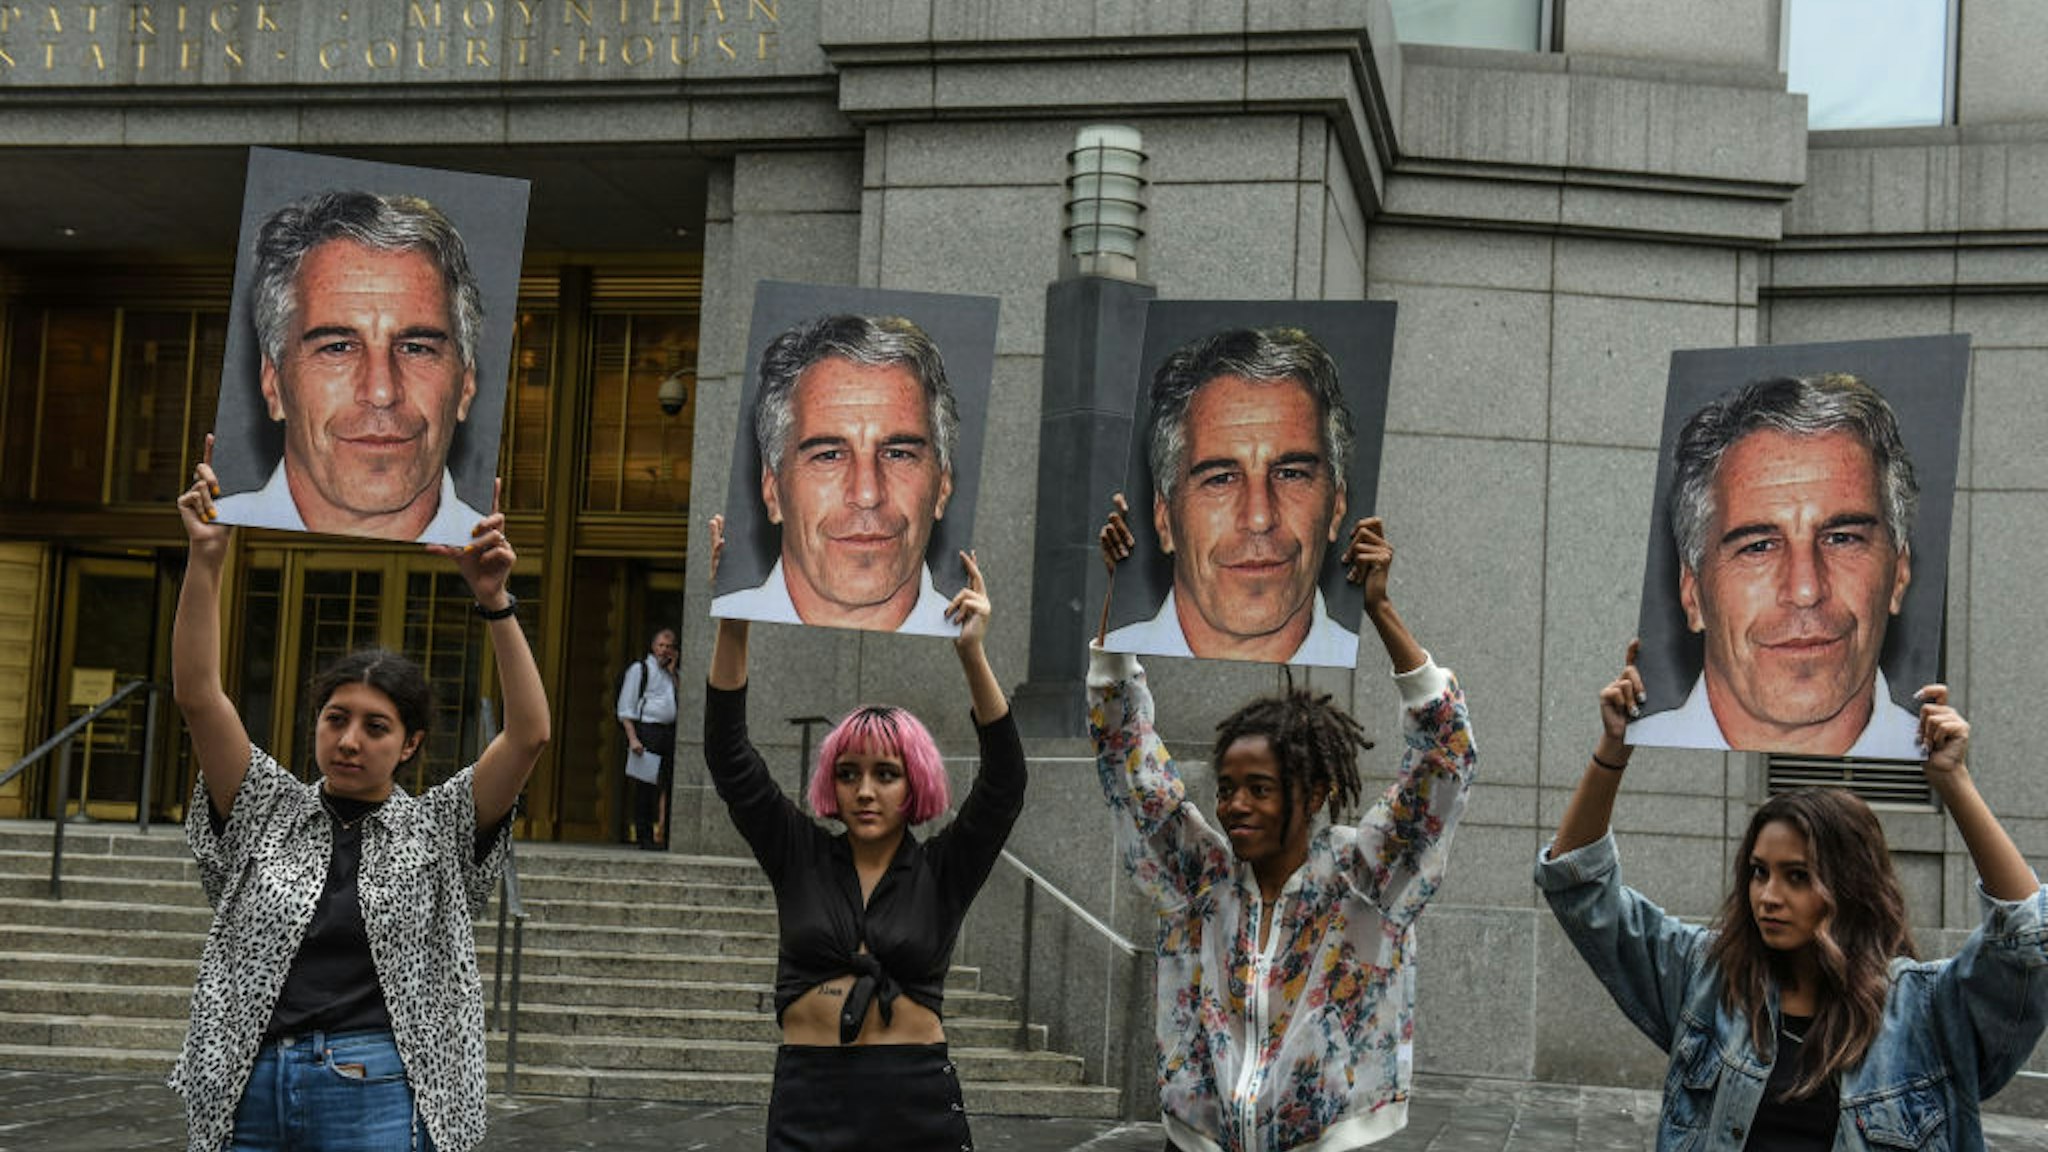 A protest group called "Hot Mess" hold up signs of Jeffrey Epstein in front of the Federal courthouse on July 8, 2019 in New York City. According to reports, Epstein will be charged with one count of sex trafficking of minors and one count of conspiracy to engage in sex trafficking of minors. (Photo by Stephanie Keith/Getty Images)